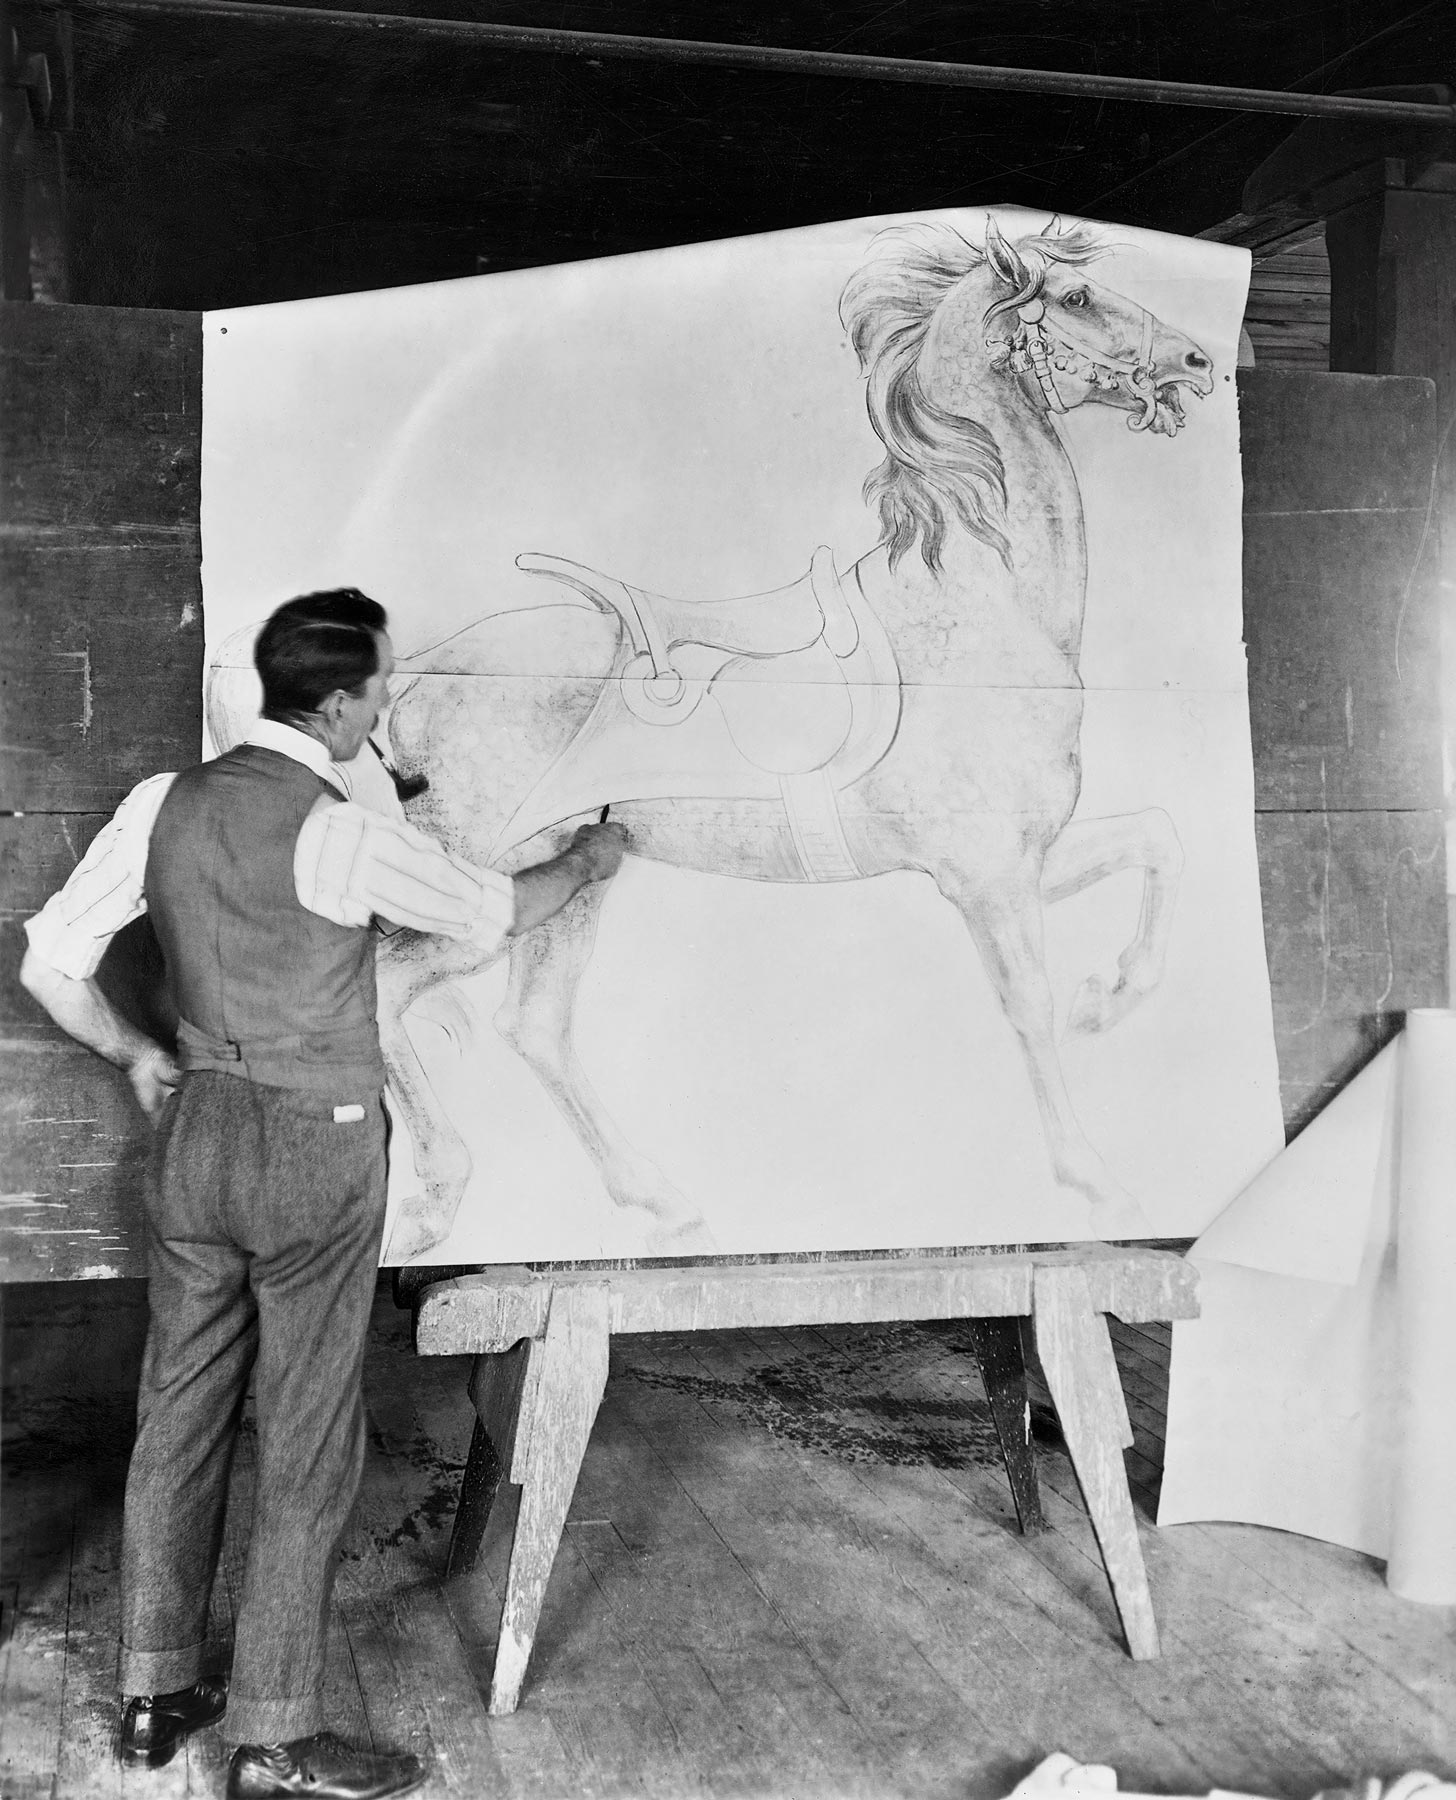 Müller sketching a standing horse